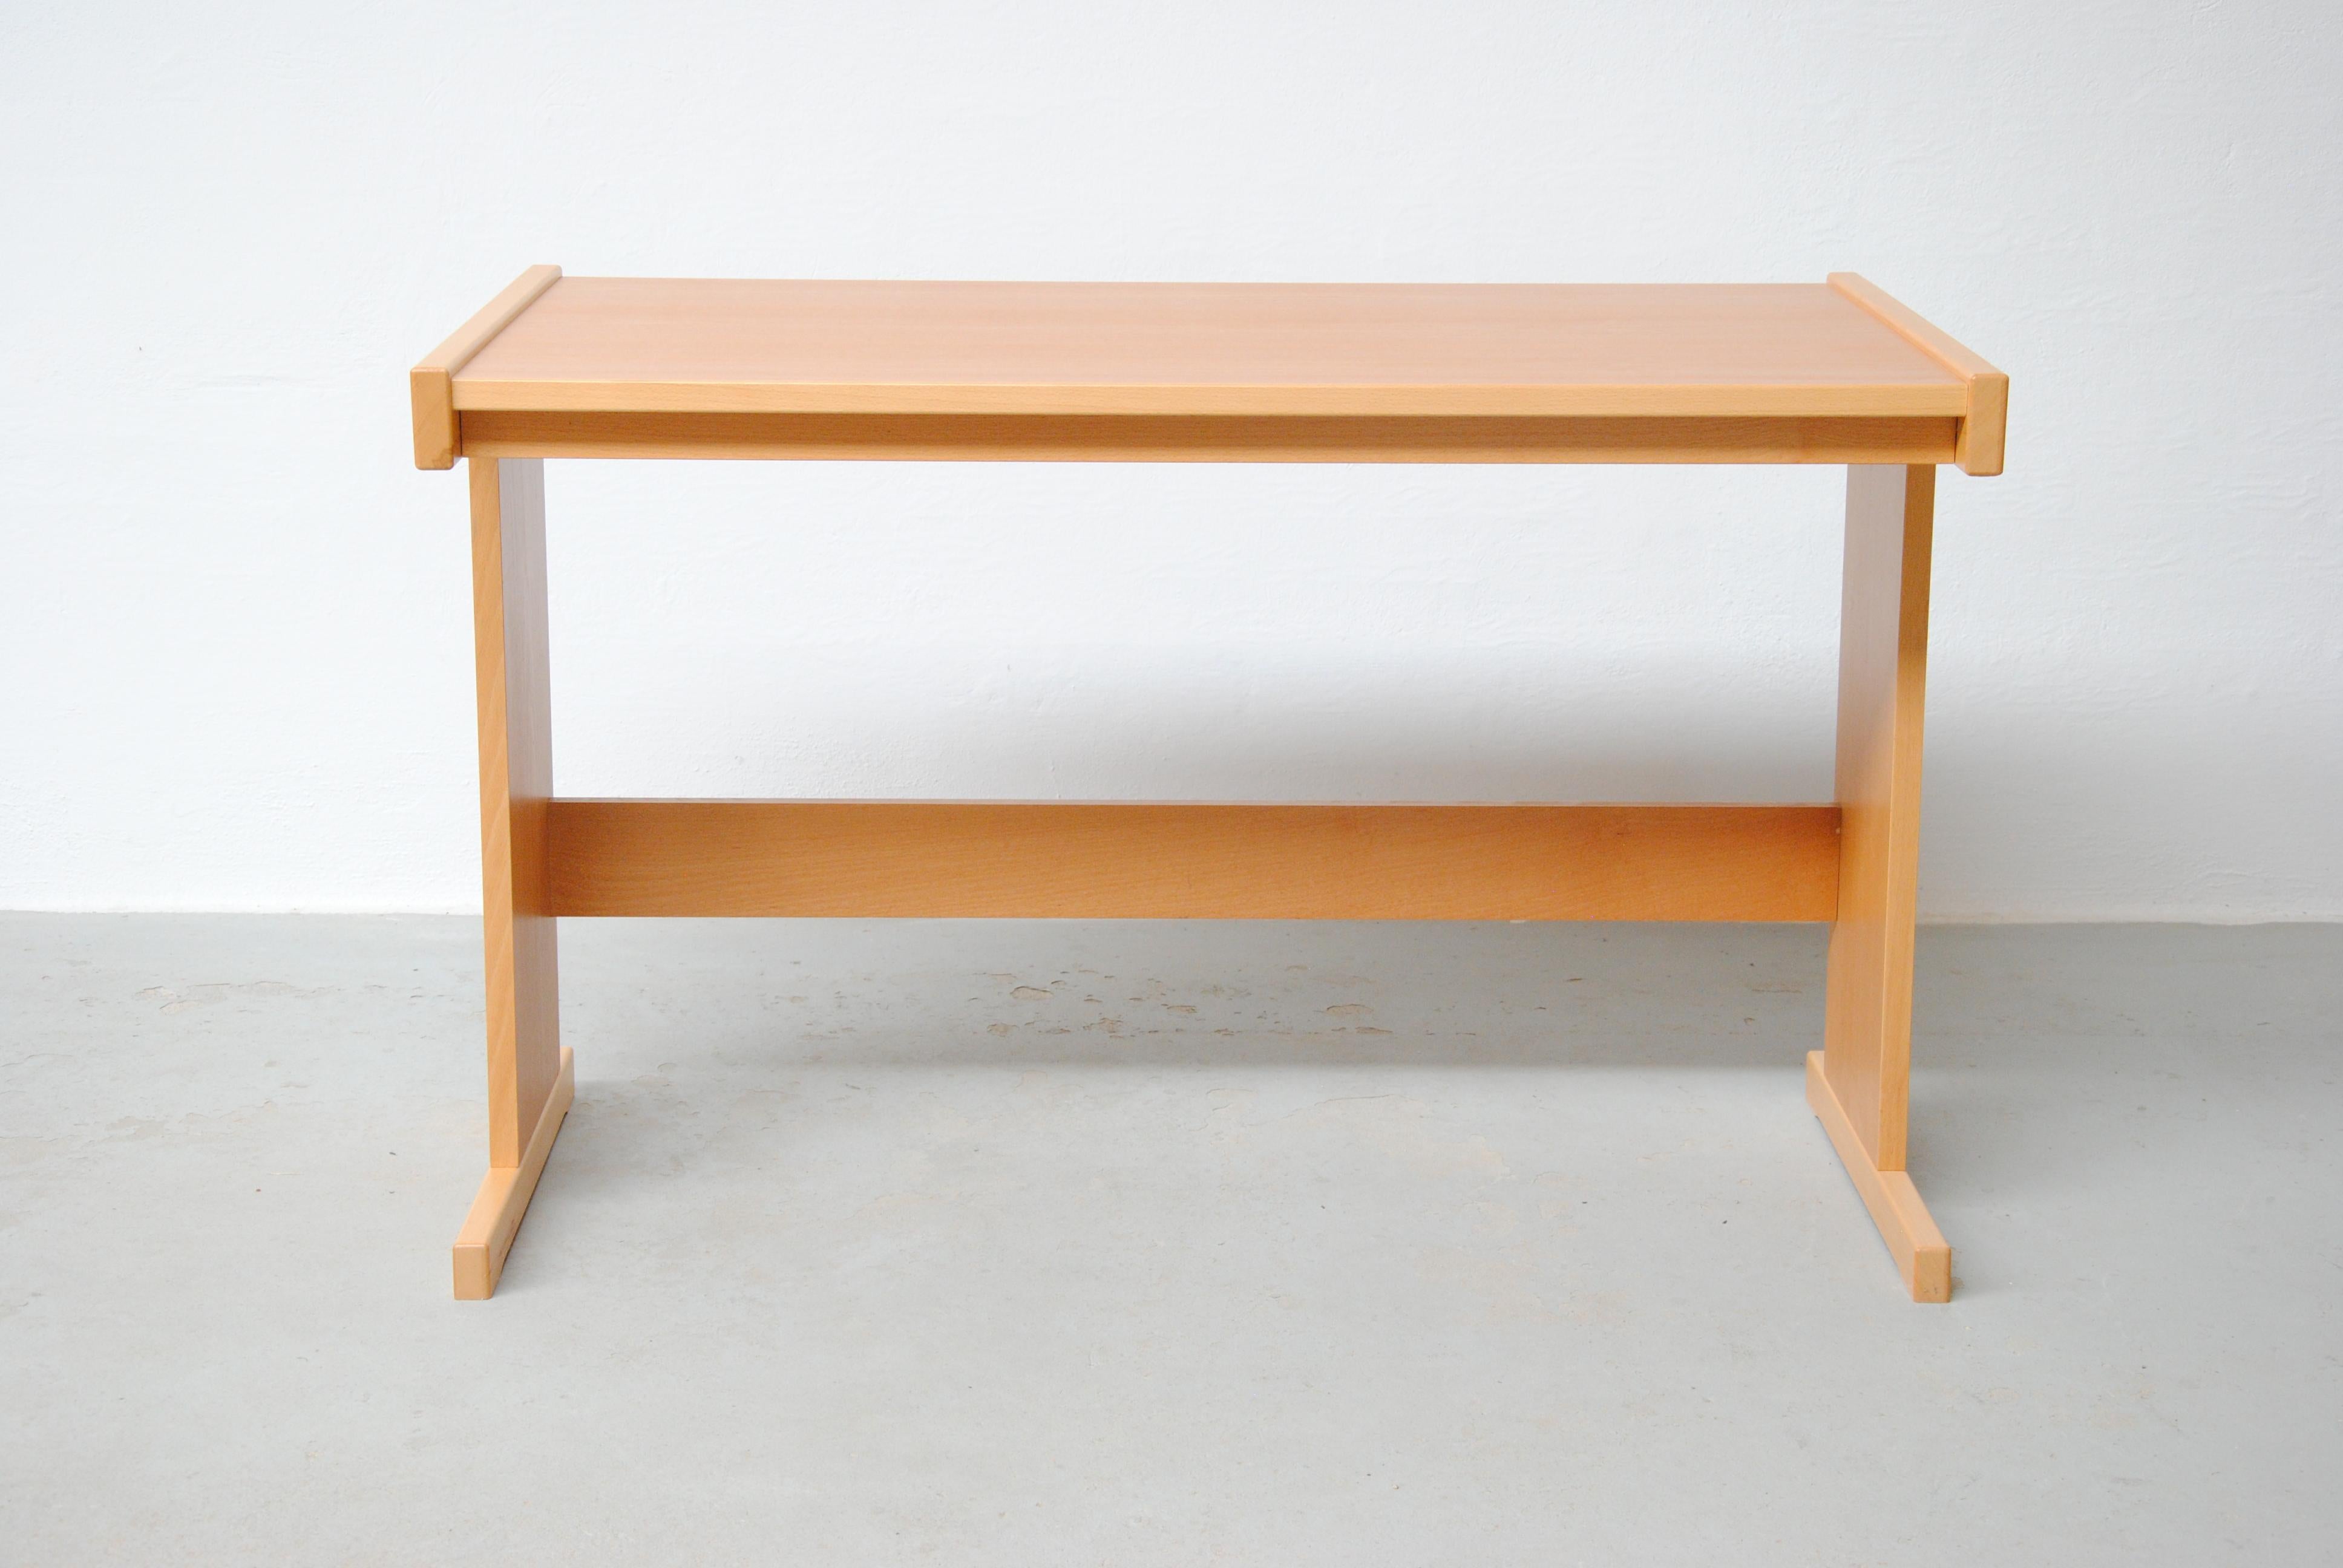 1990's Danish Bent Silberg small desks by Bent Silberg Mobler.

The desks have never been used why they are all in excellent condition and are still in their original boxes.

Shipping cost is for shipping of one disassembled desk - if you buy more